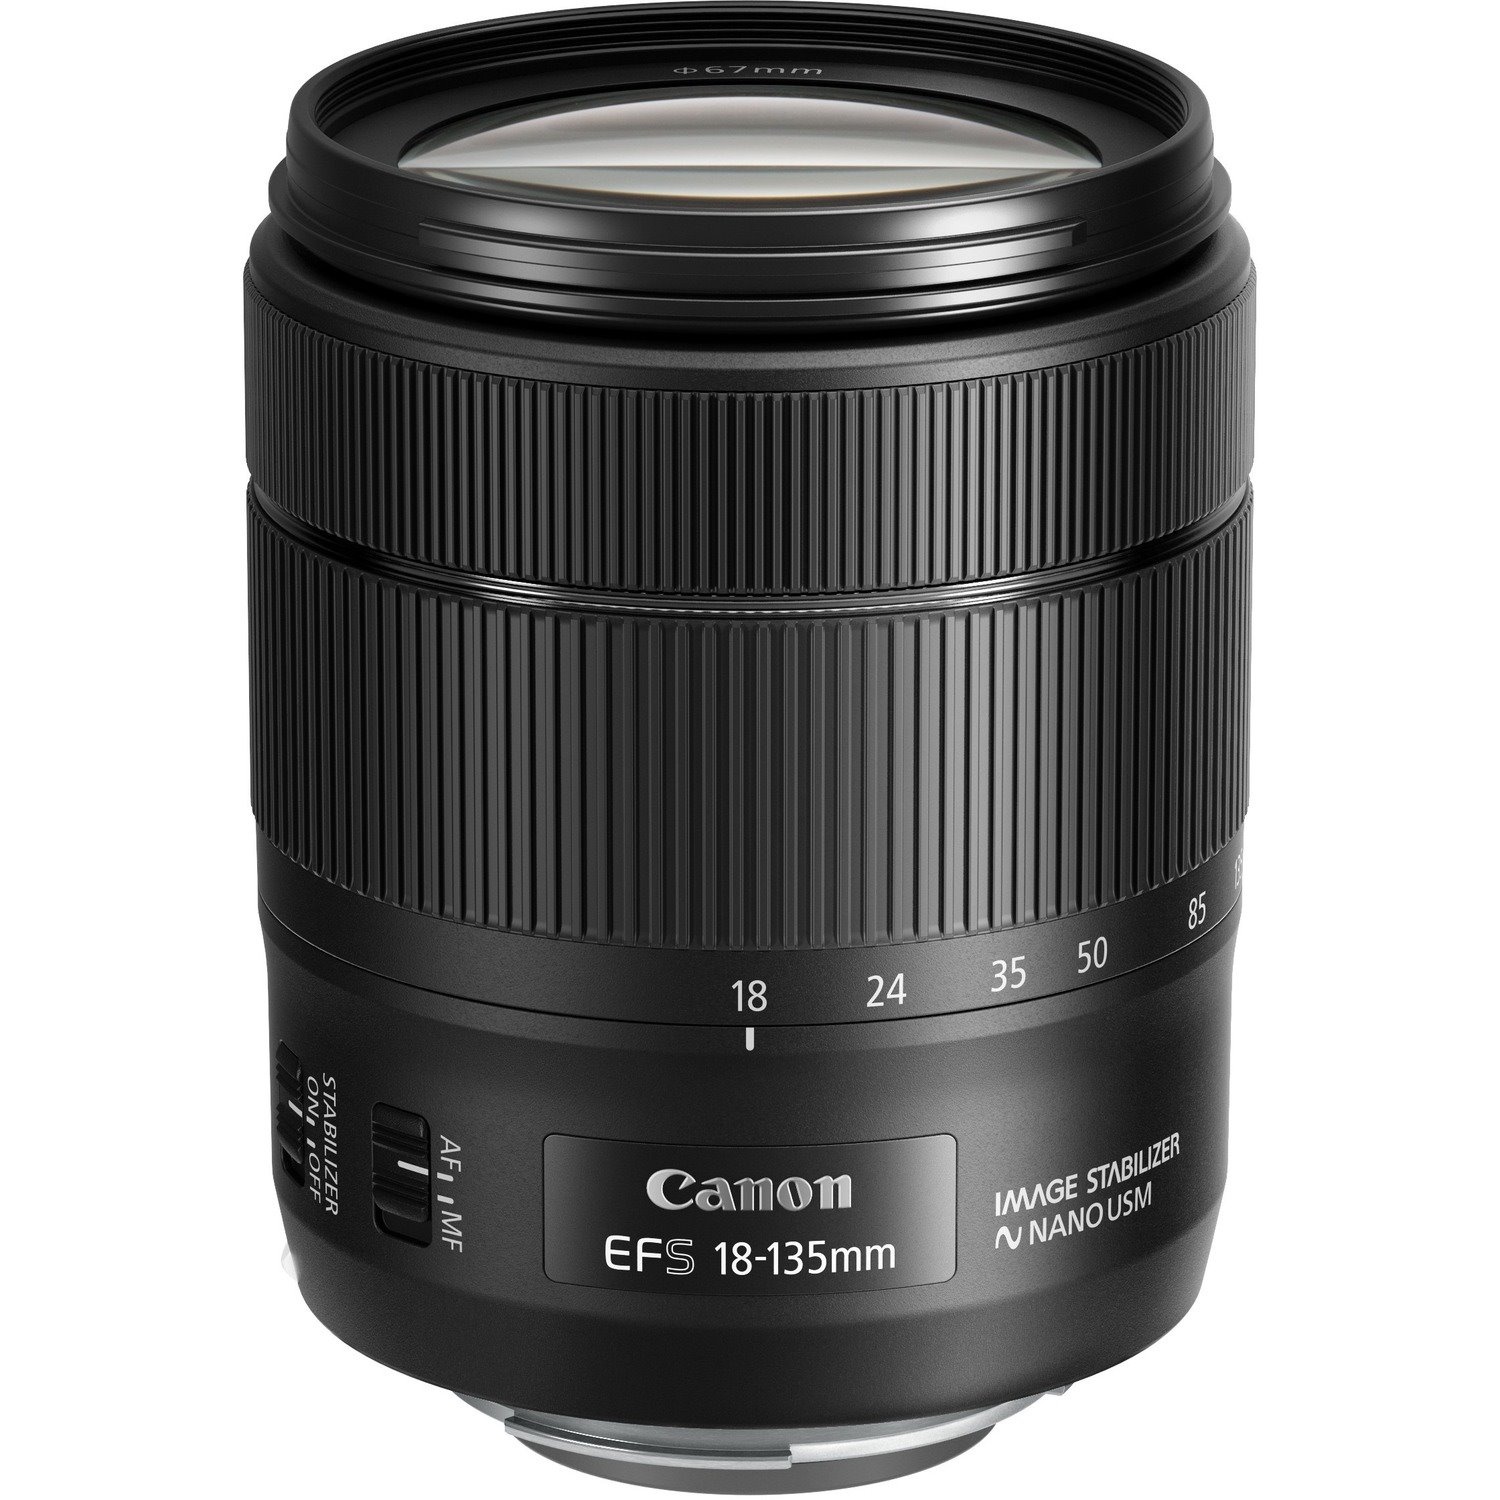 Canon - 18 mm to 135 mm - f/5.6 - Standard Zoom Lens for Canon EF-S